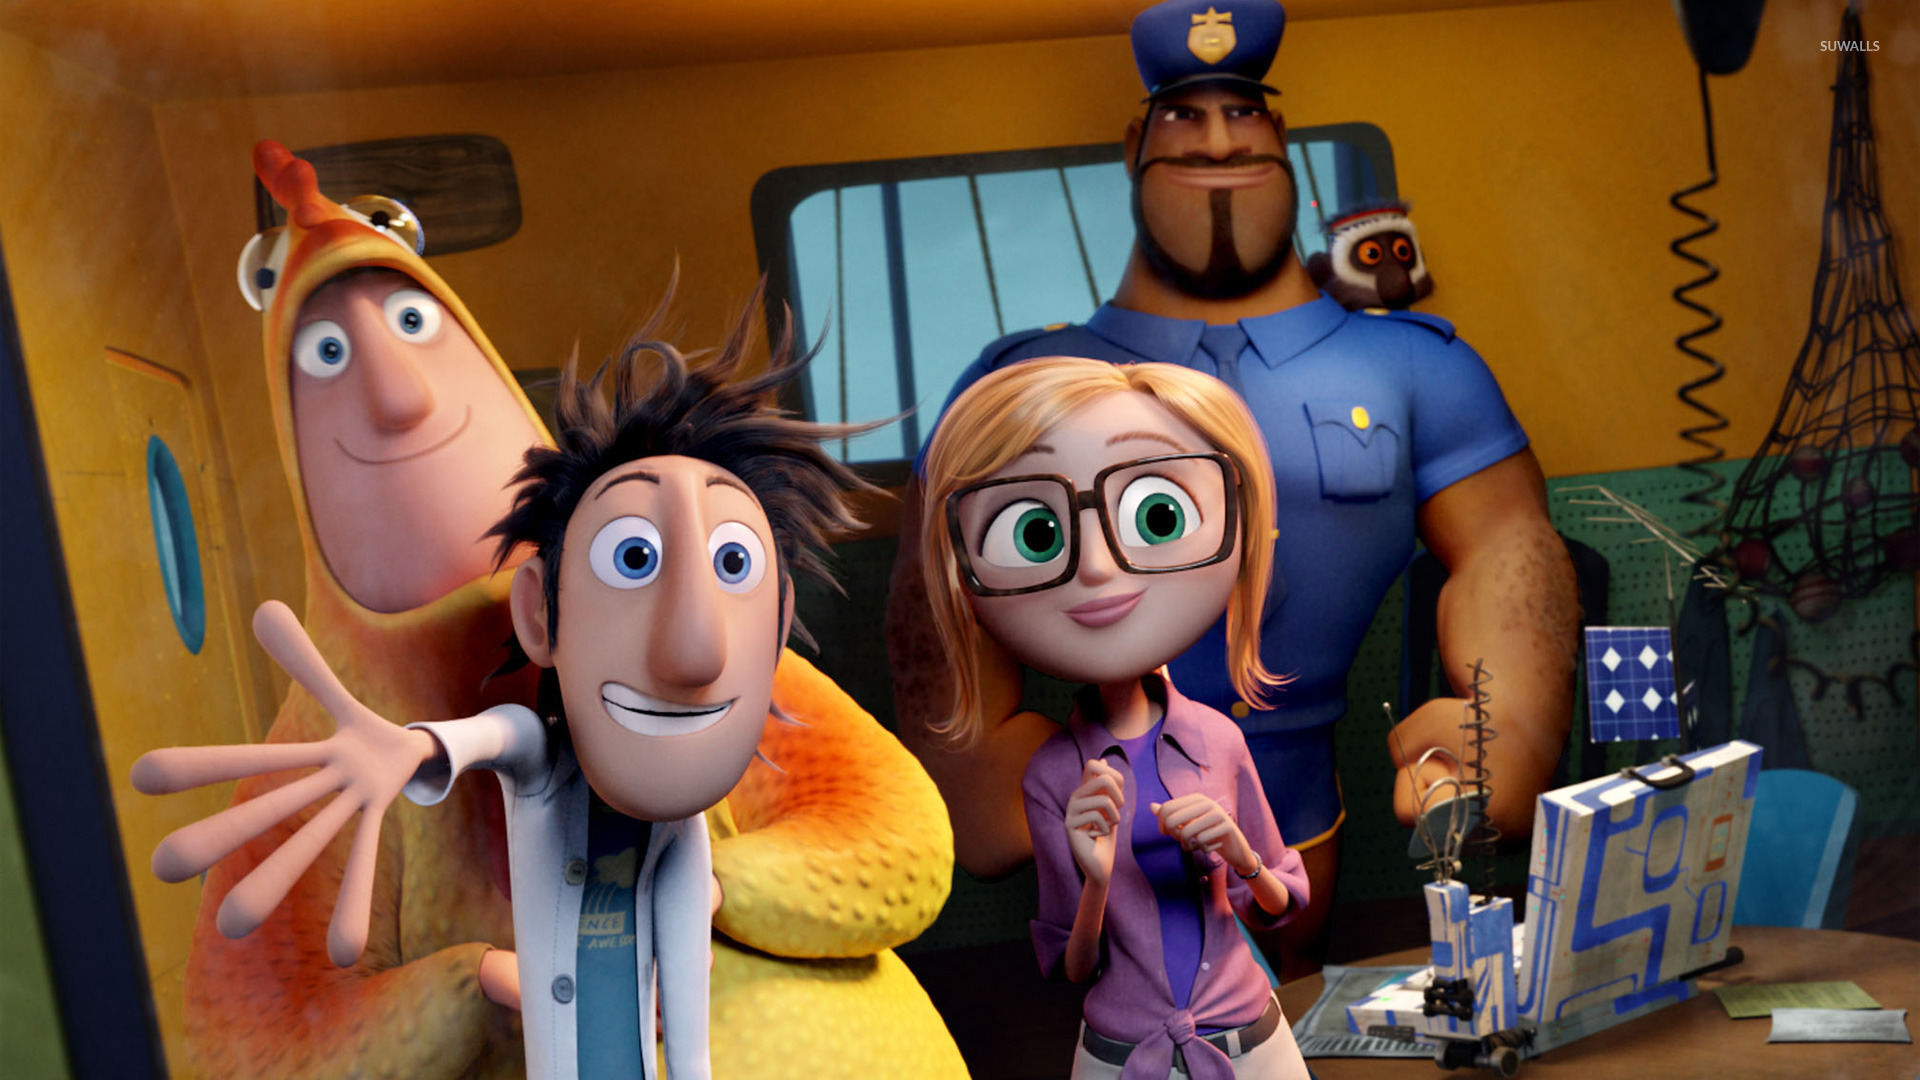 Cloudy with a Chance of Meatballs 2 wallpapers. 